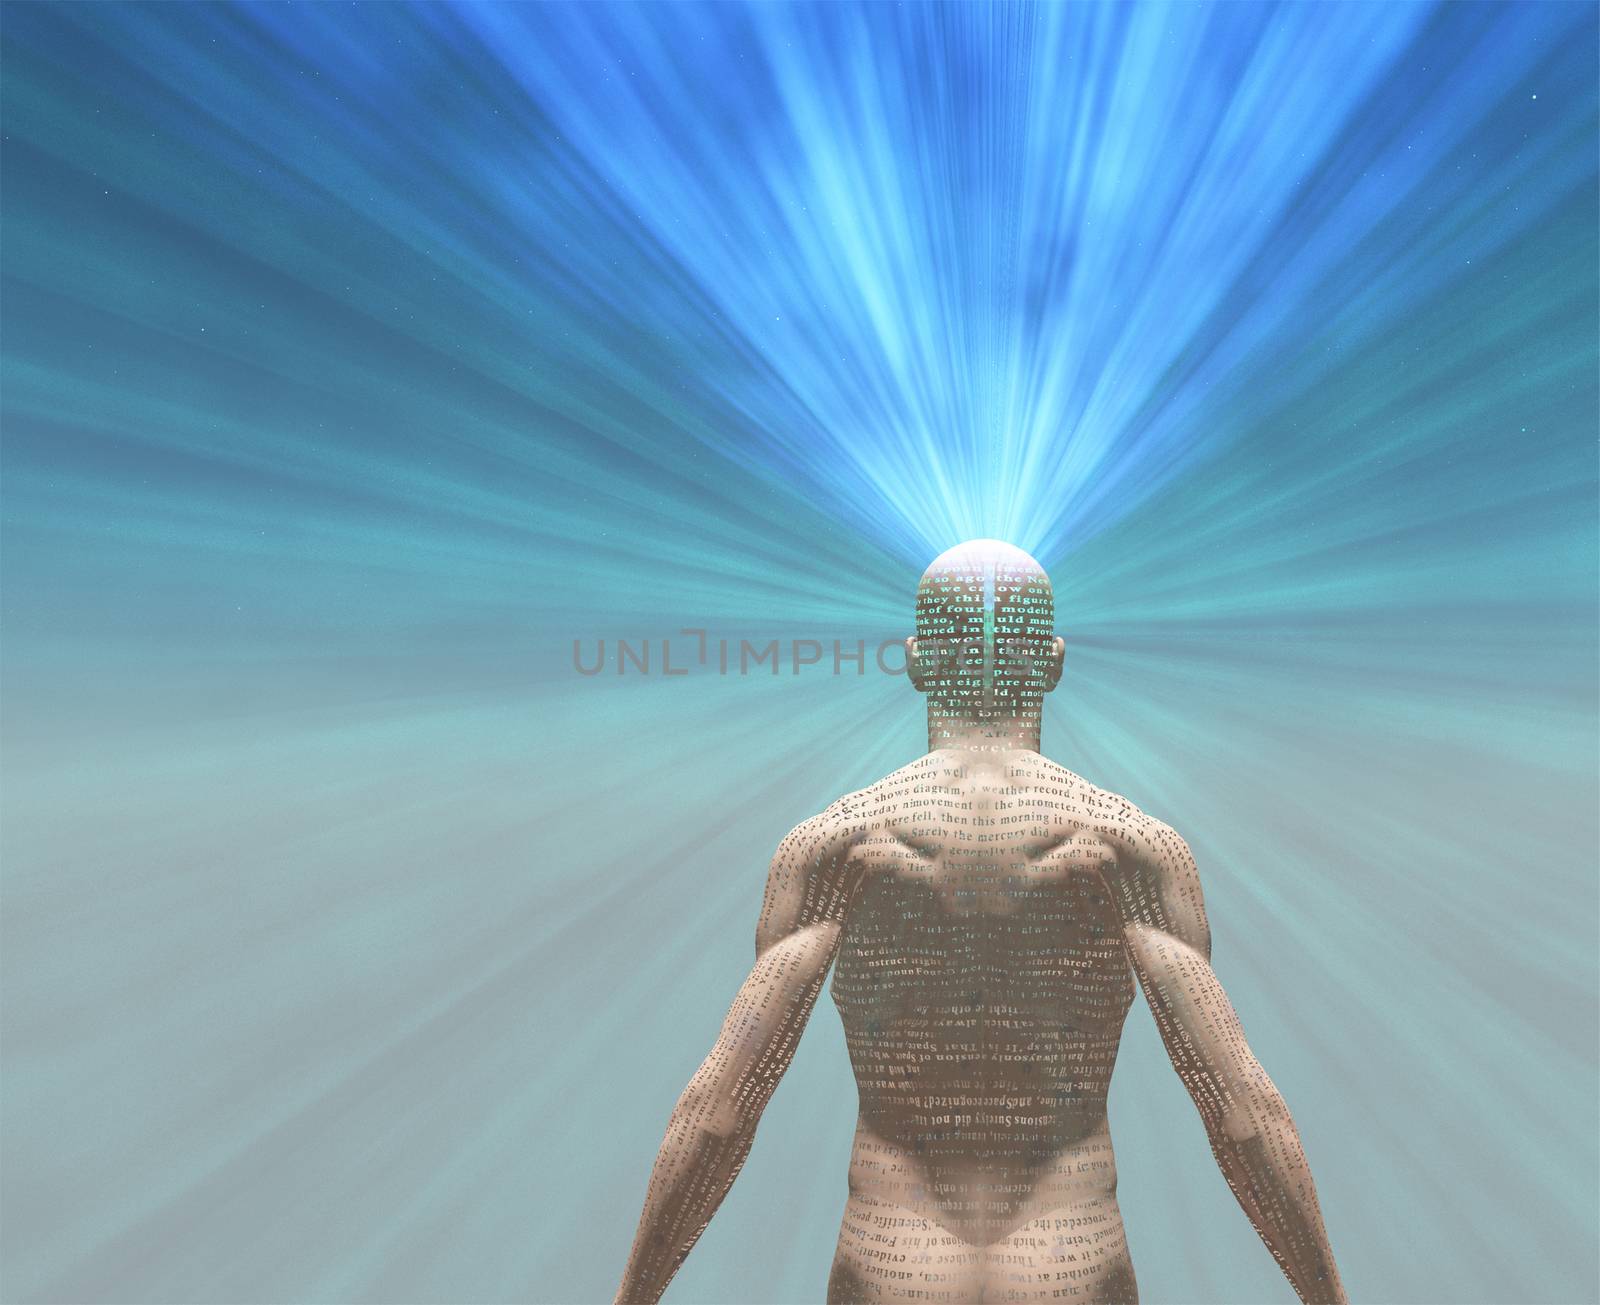 Man radiates light from text on his skin